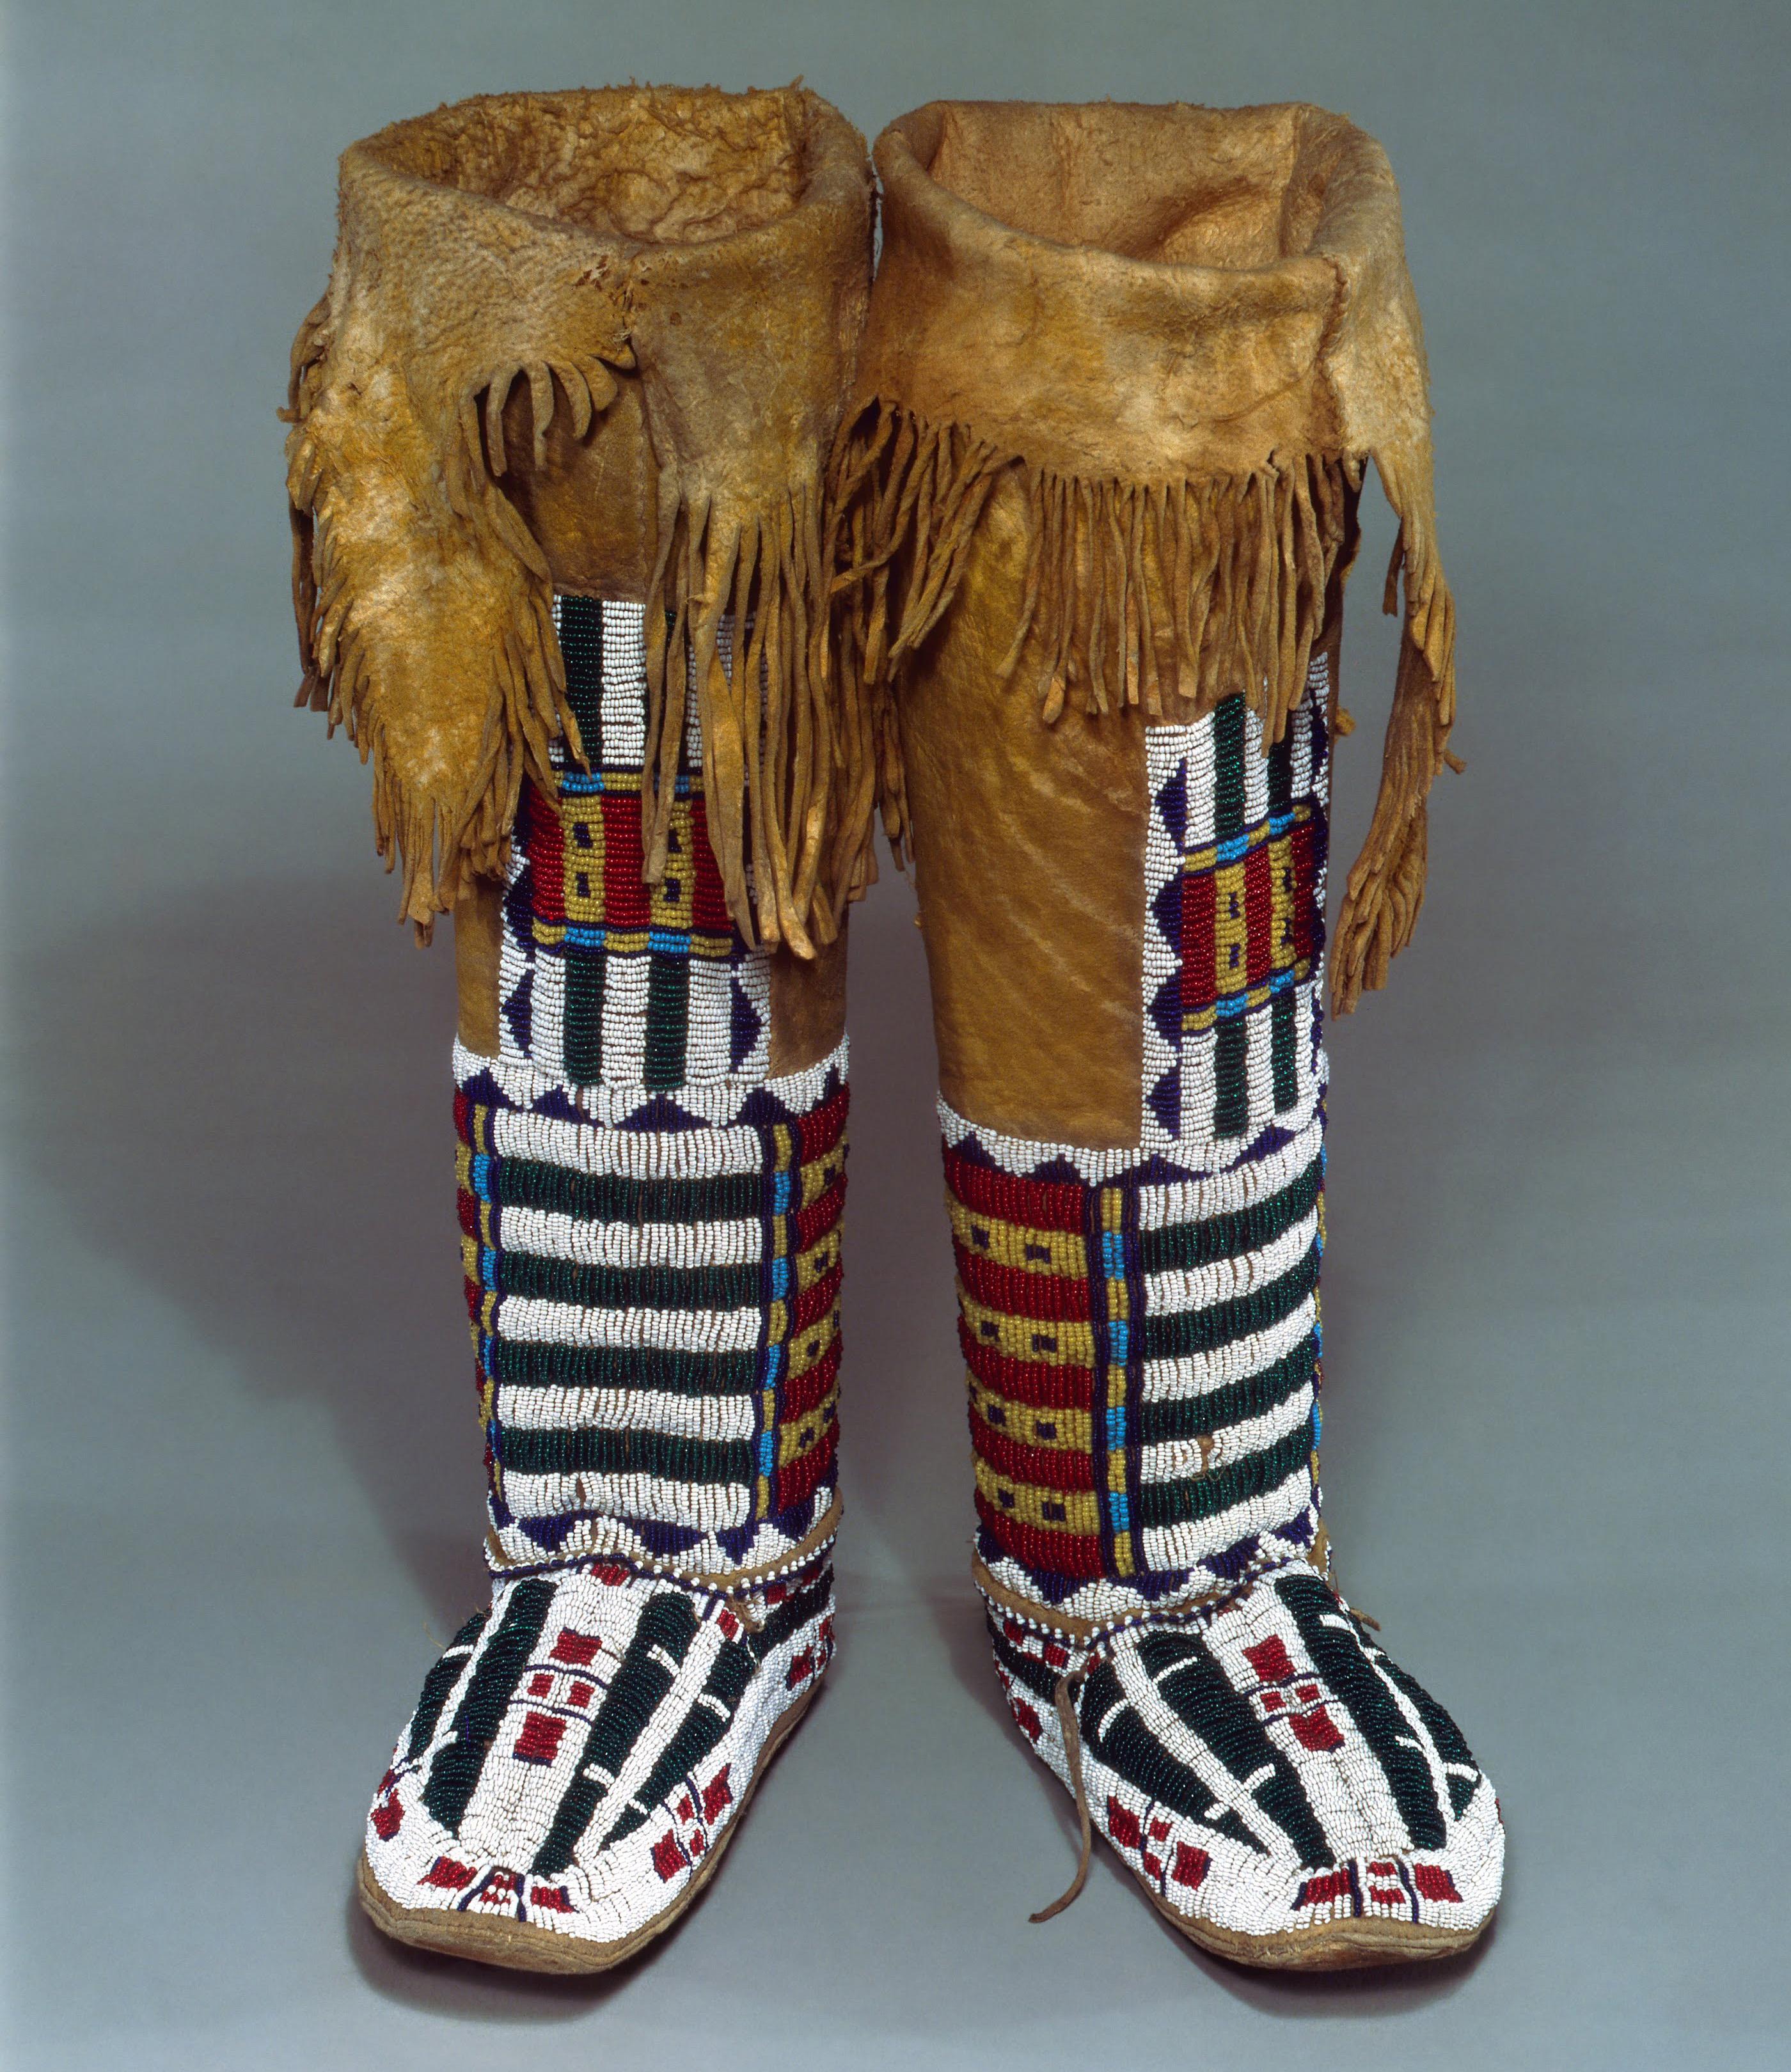 Leather boots with decorative beads. United States, Cheyenne peoples, 1870s.jpeg